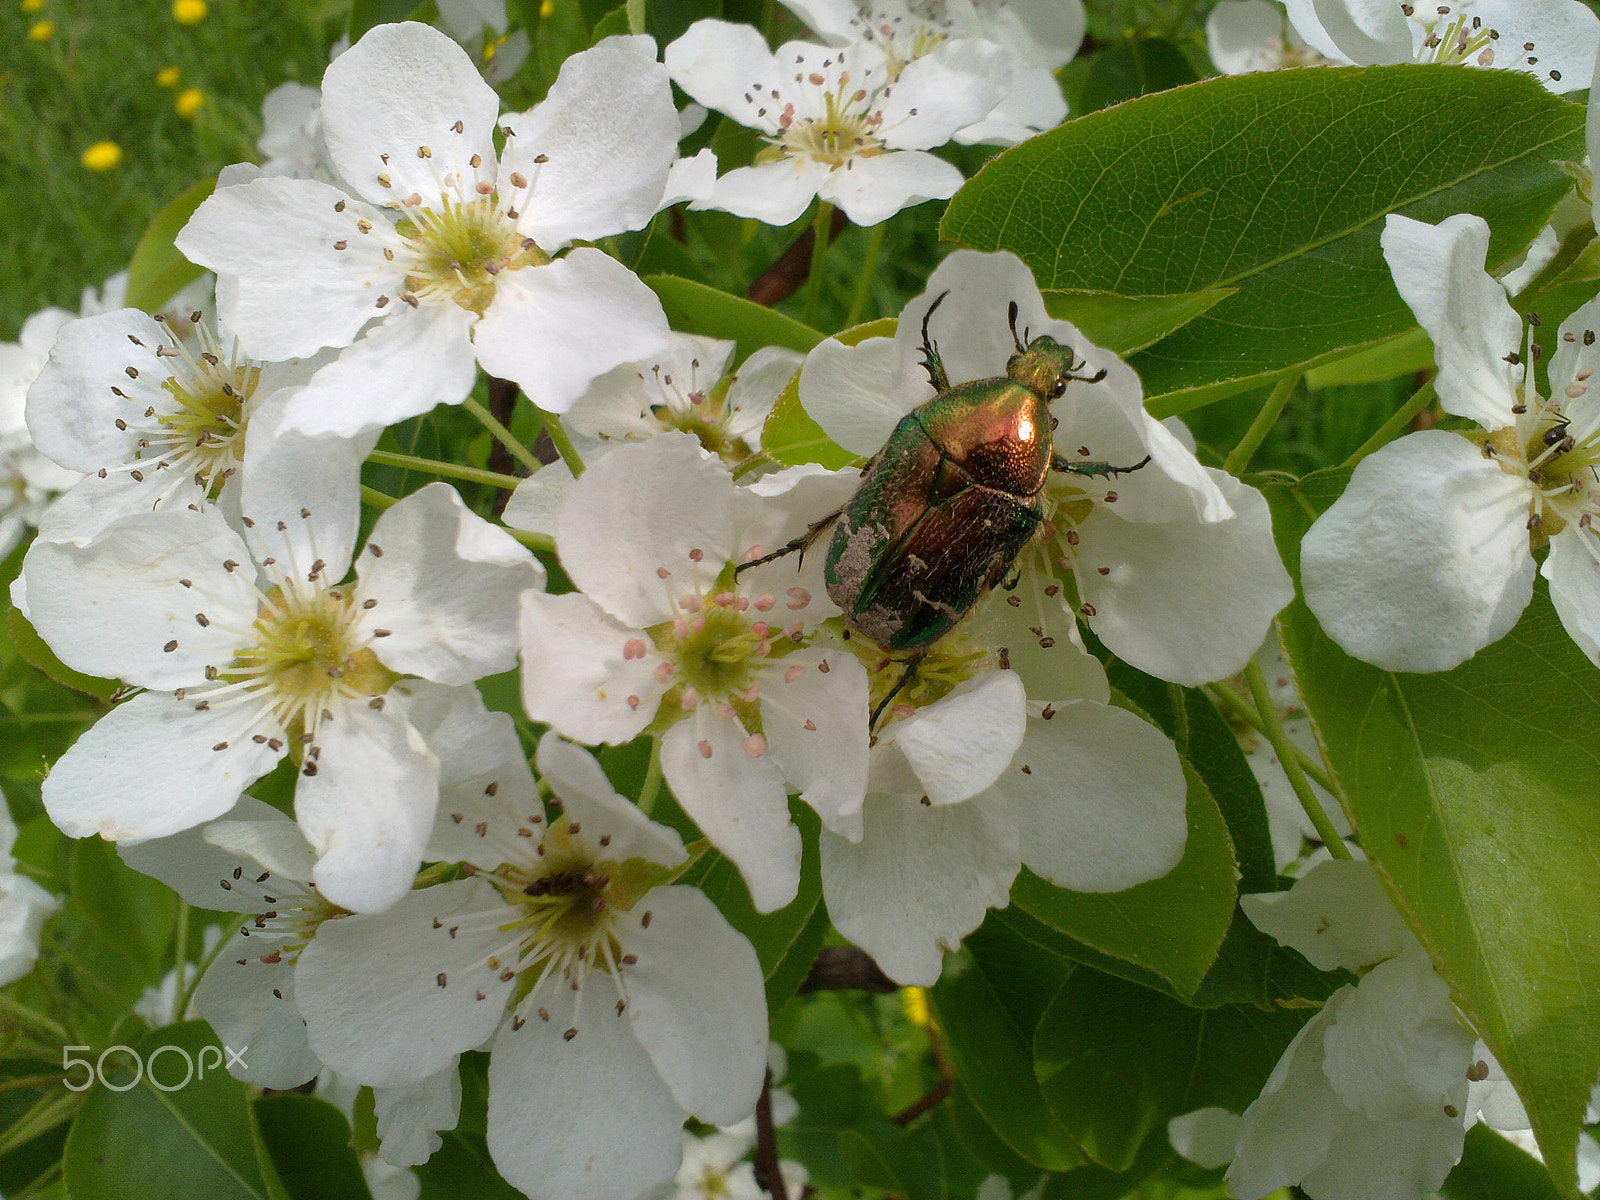 Nokia N86 8MP sample photo. Beetle among beautiful flowers and leaves photography